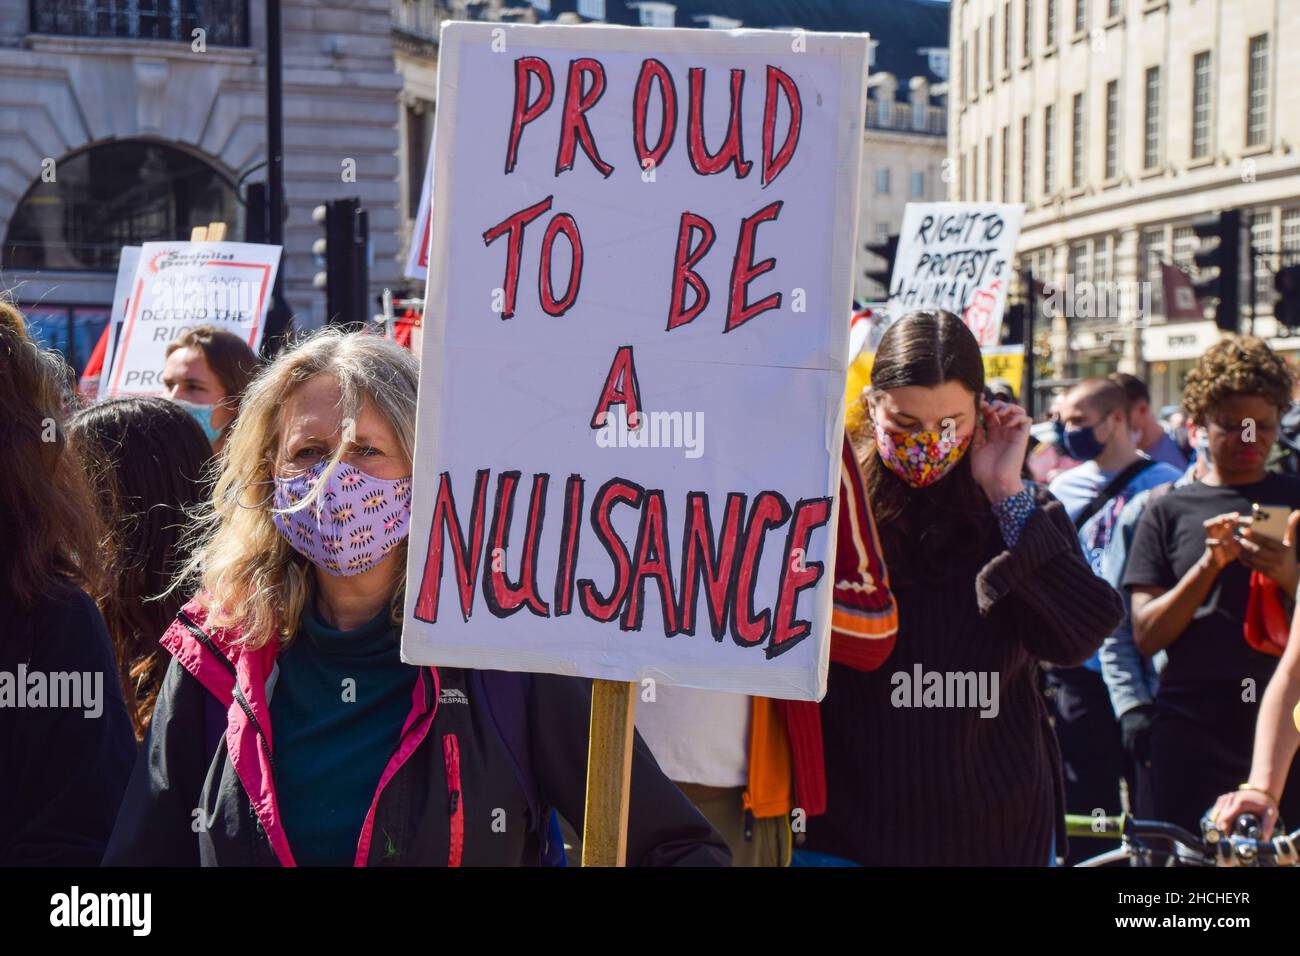 London, United Kingdom. 17th April 2021. Demonstrators at the Kill The Bill protest in Piccadilly Circus. Crowds once again marched through Central London in protest of the Police, Crime, Sentencing and Courts Bill. Stock Photo